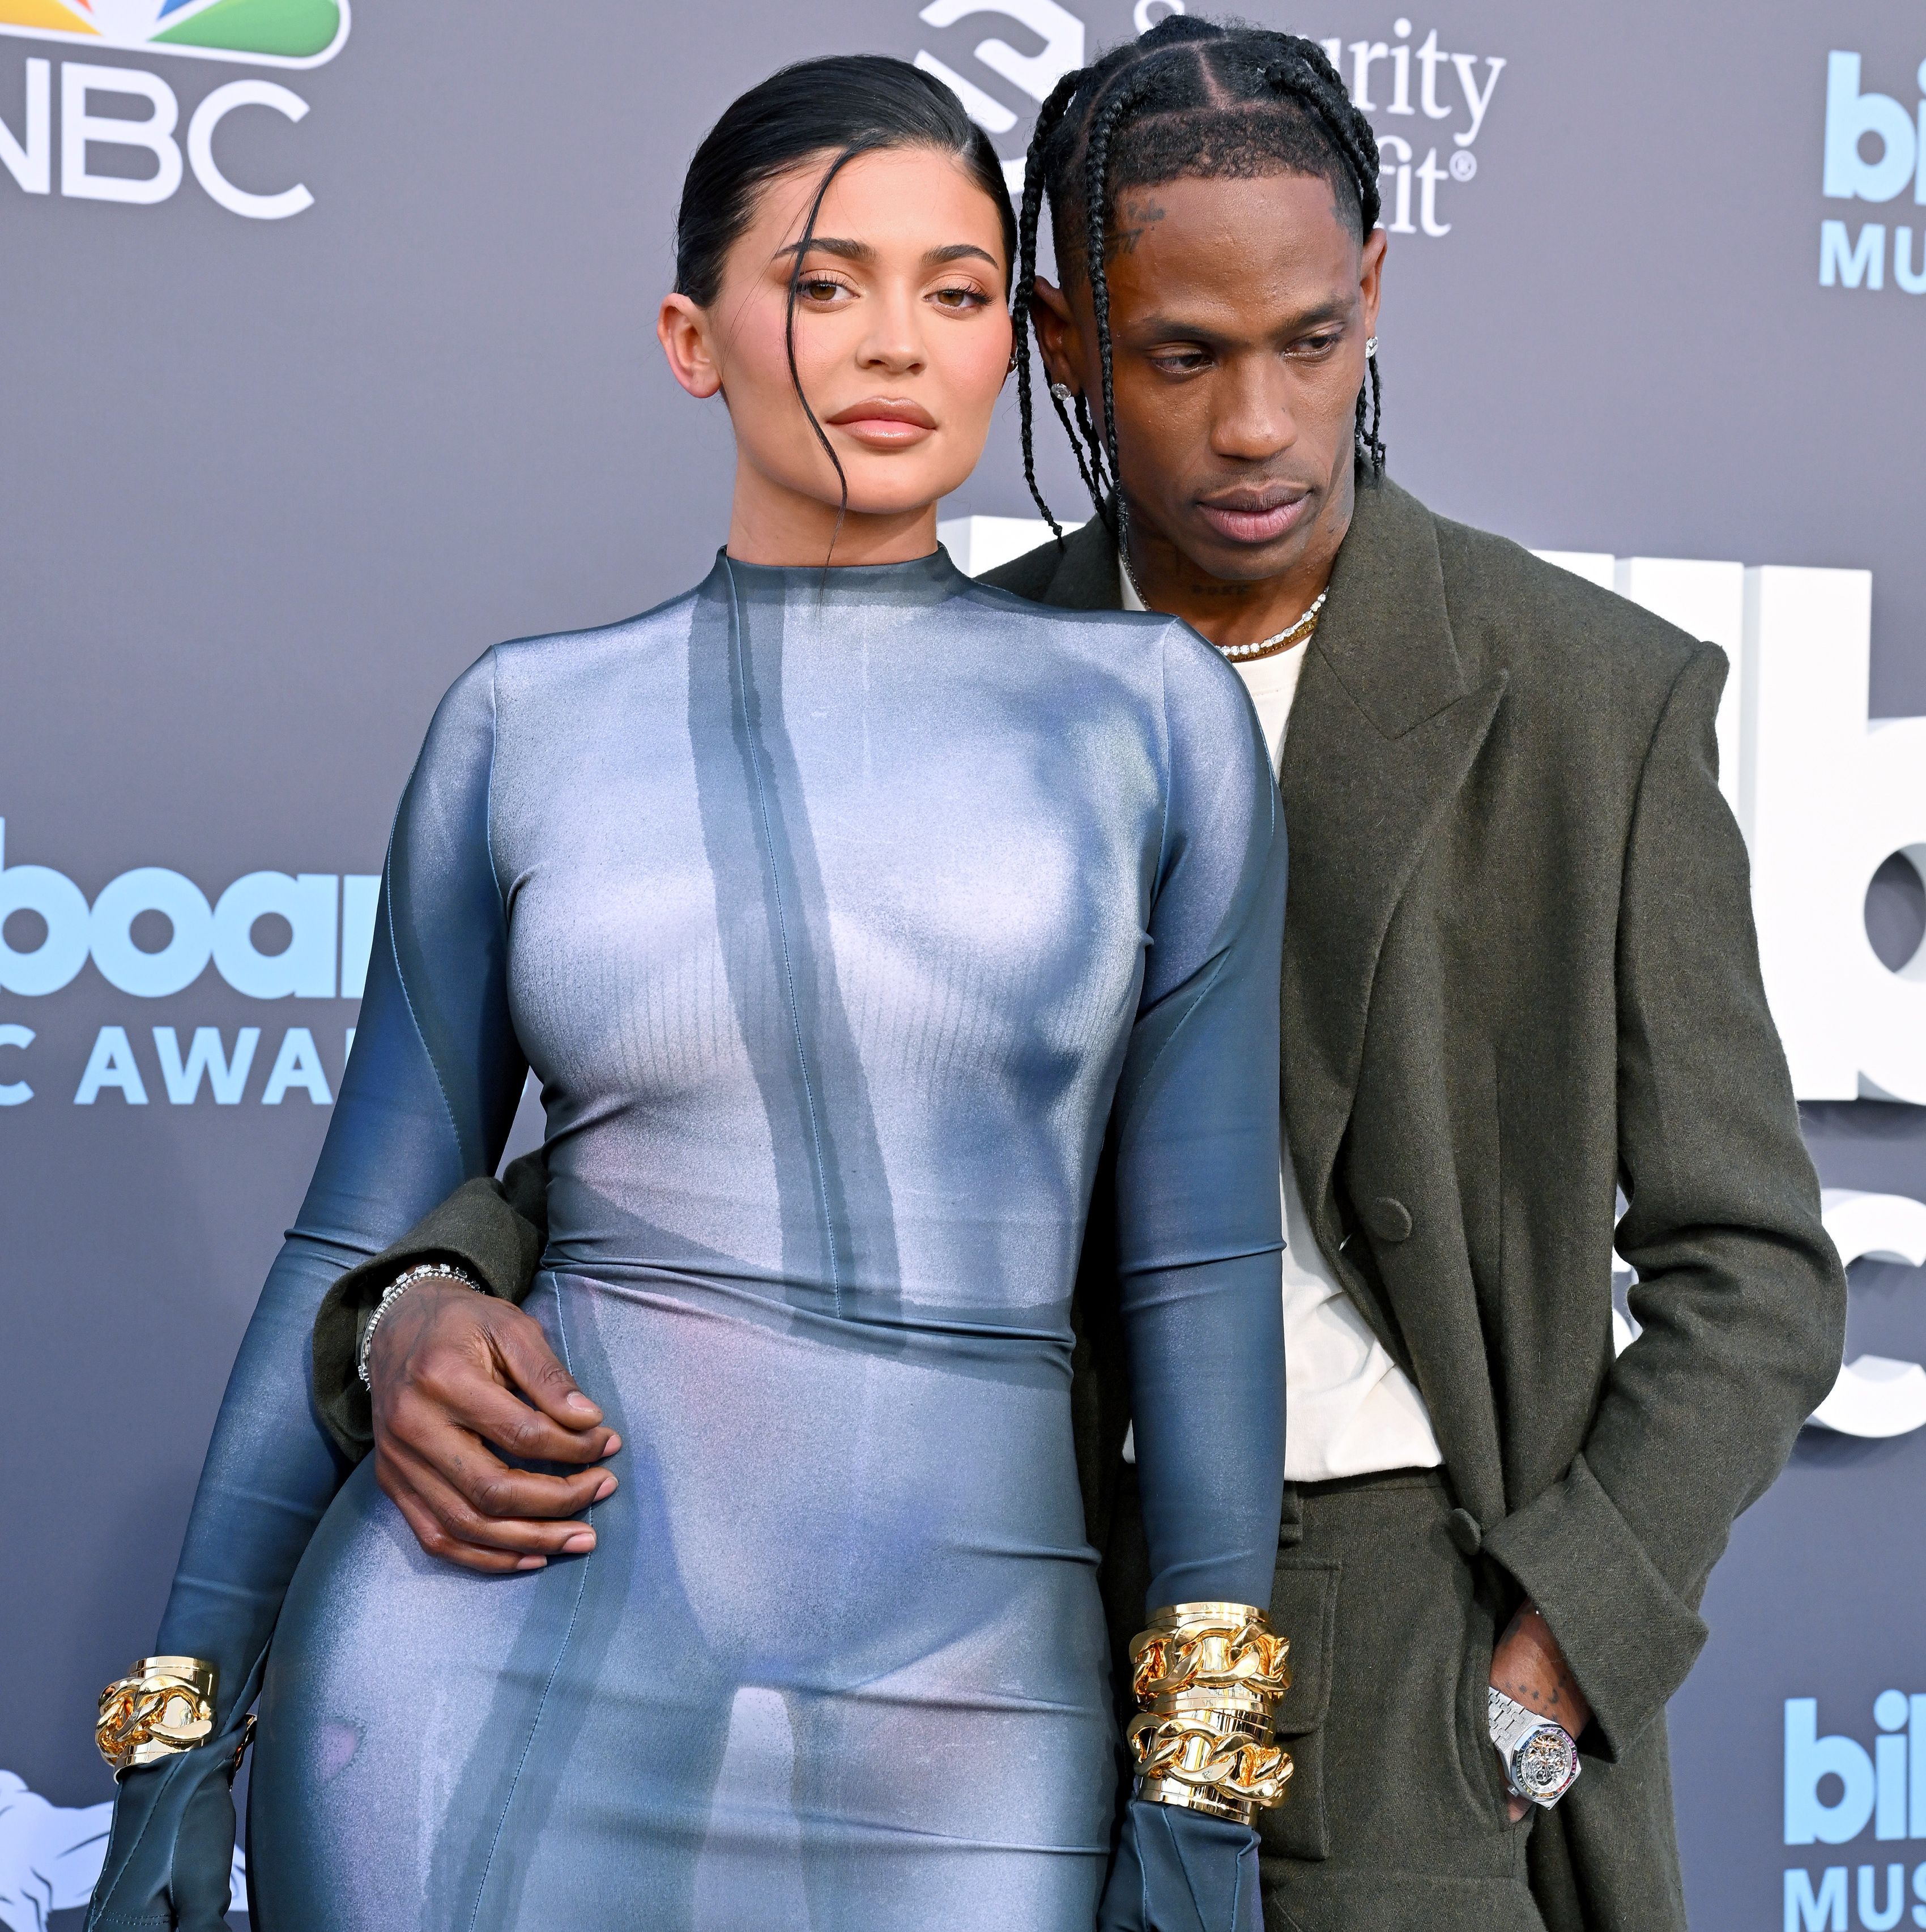 Kylie Jenner Gives Rare Insight Into Co-Parenting With Ex Travis Scott